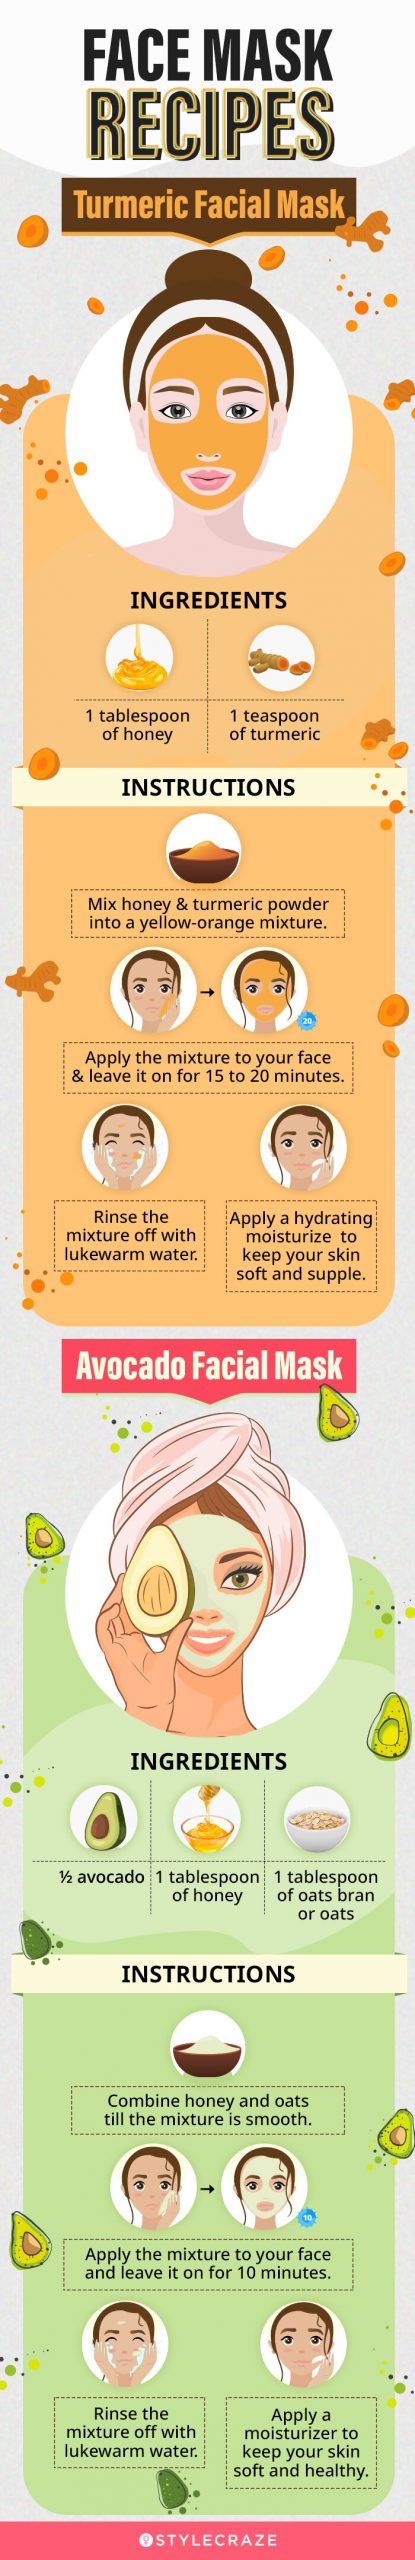 face mask recipes (infographic)